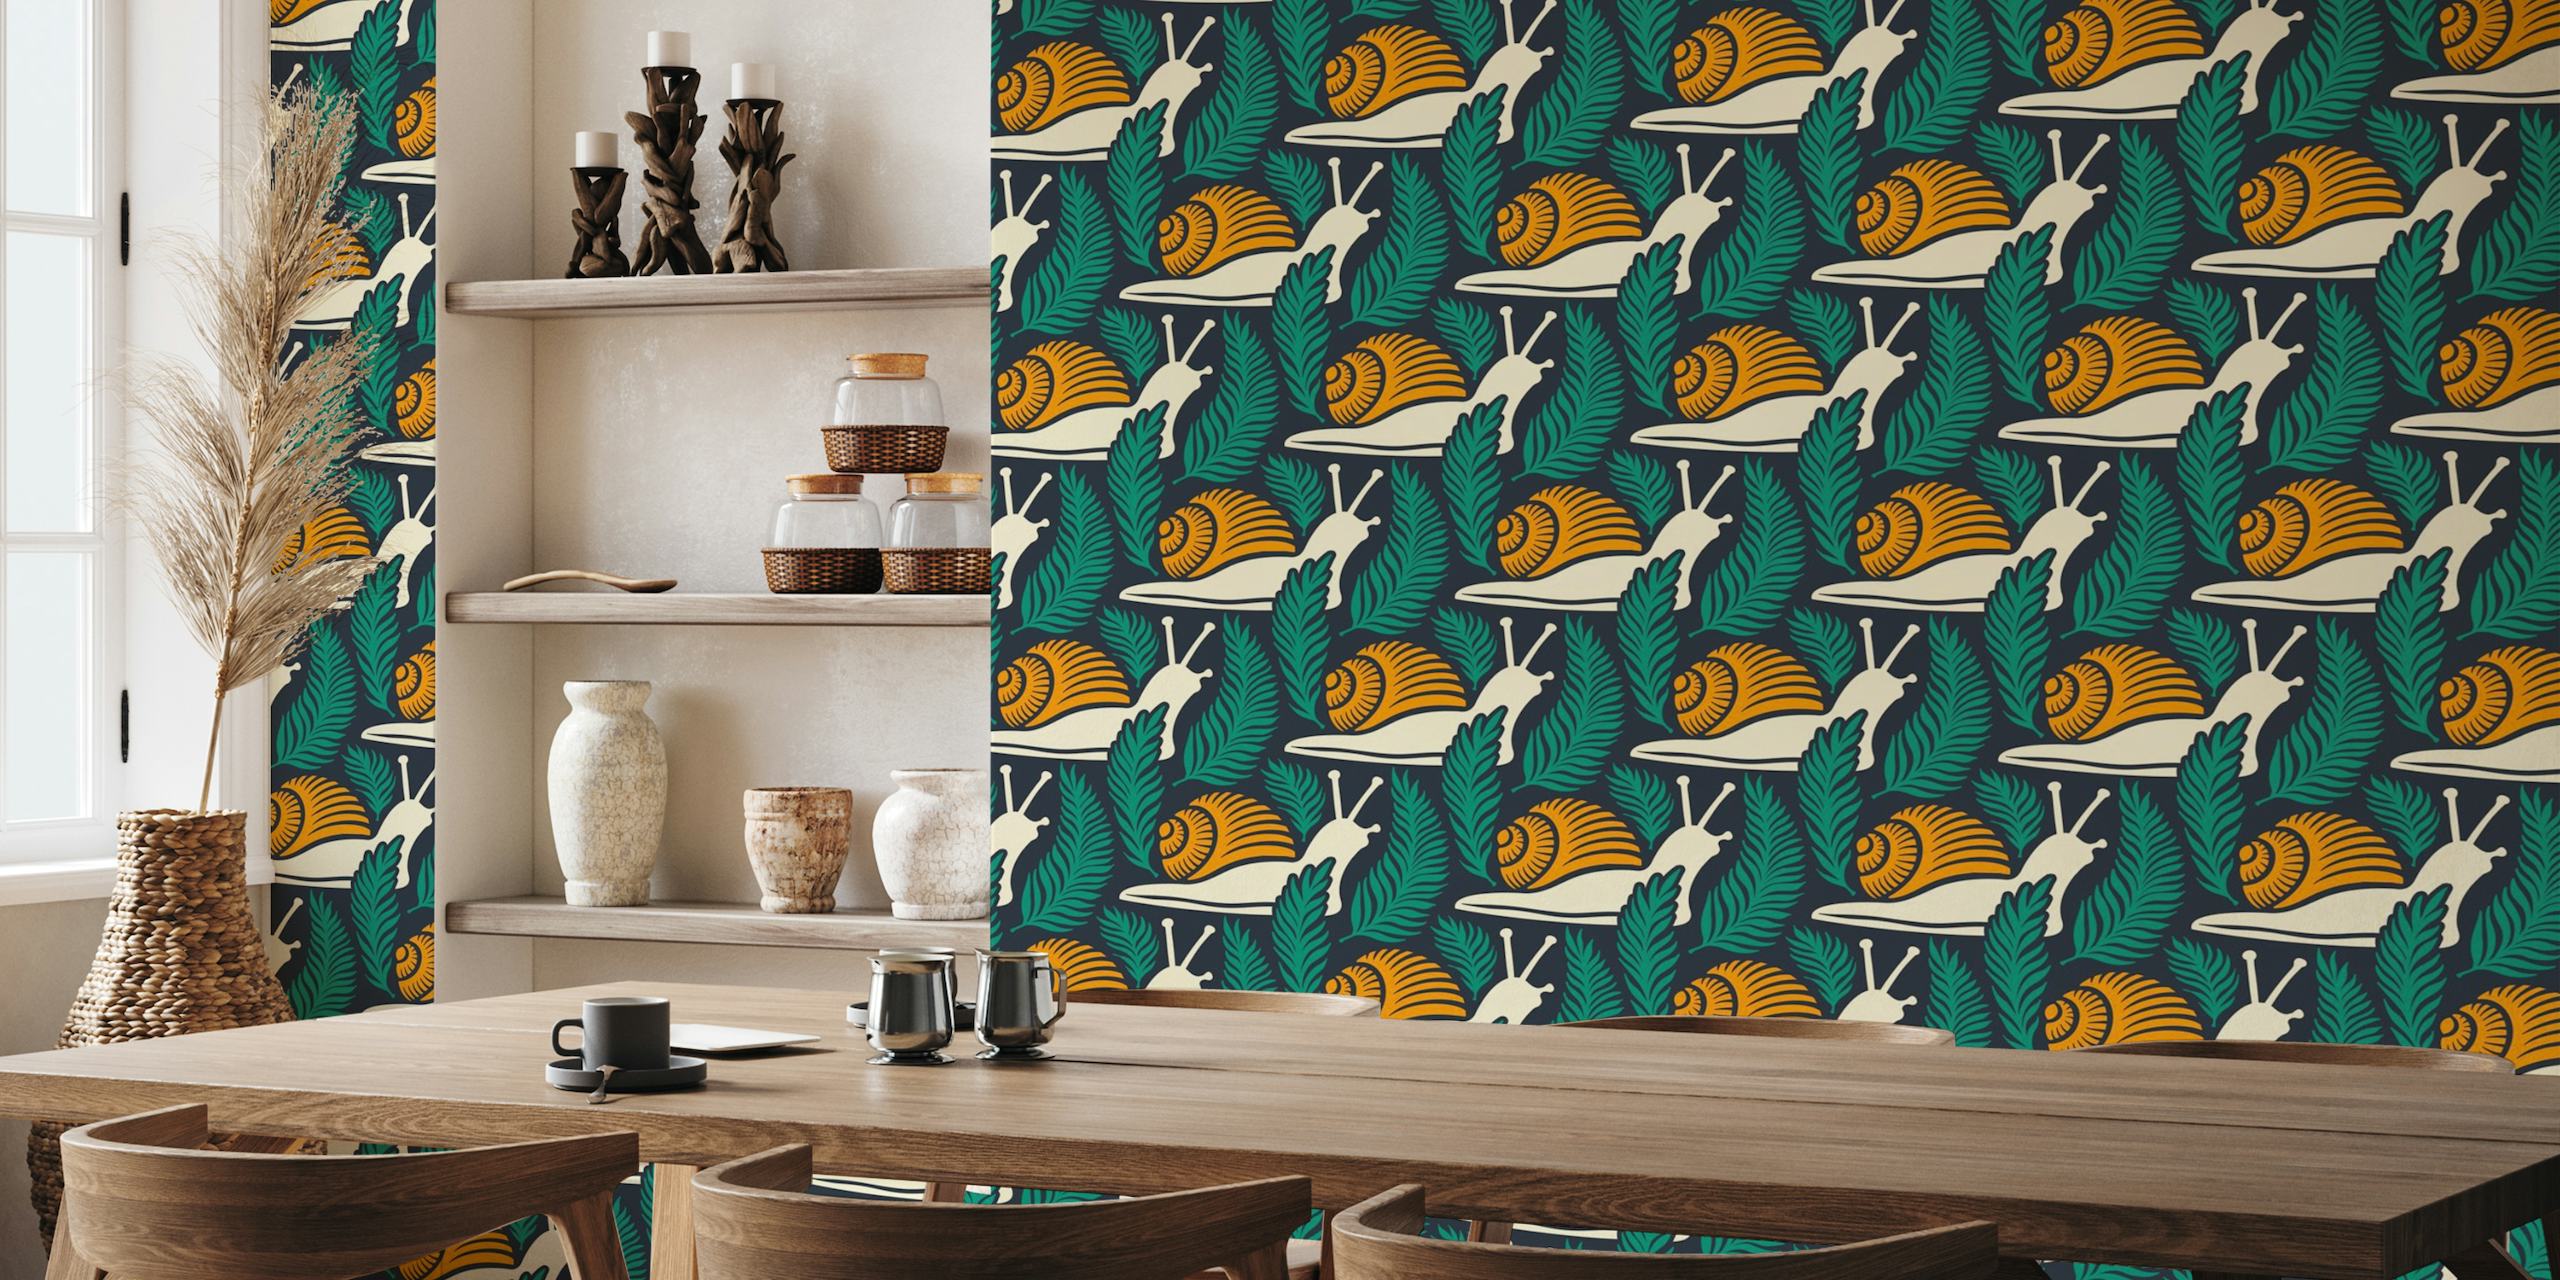 Snails in ferns, teal yellow / 3001 A ταπετσαρία